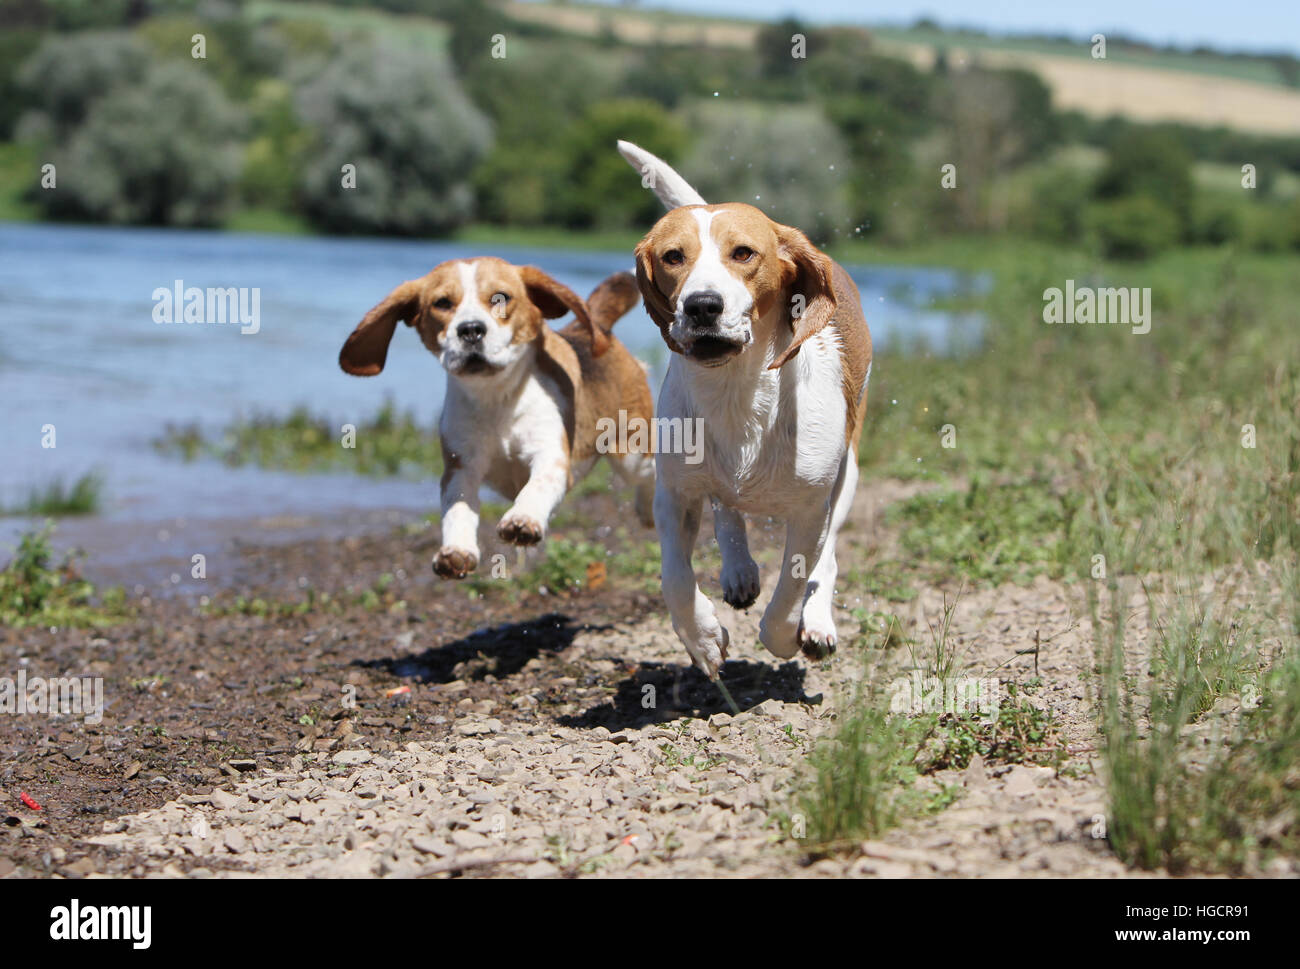 Dog Beagle two adult adults running at the water's edge Stock Photo